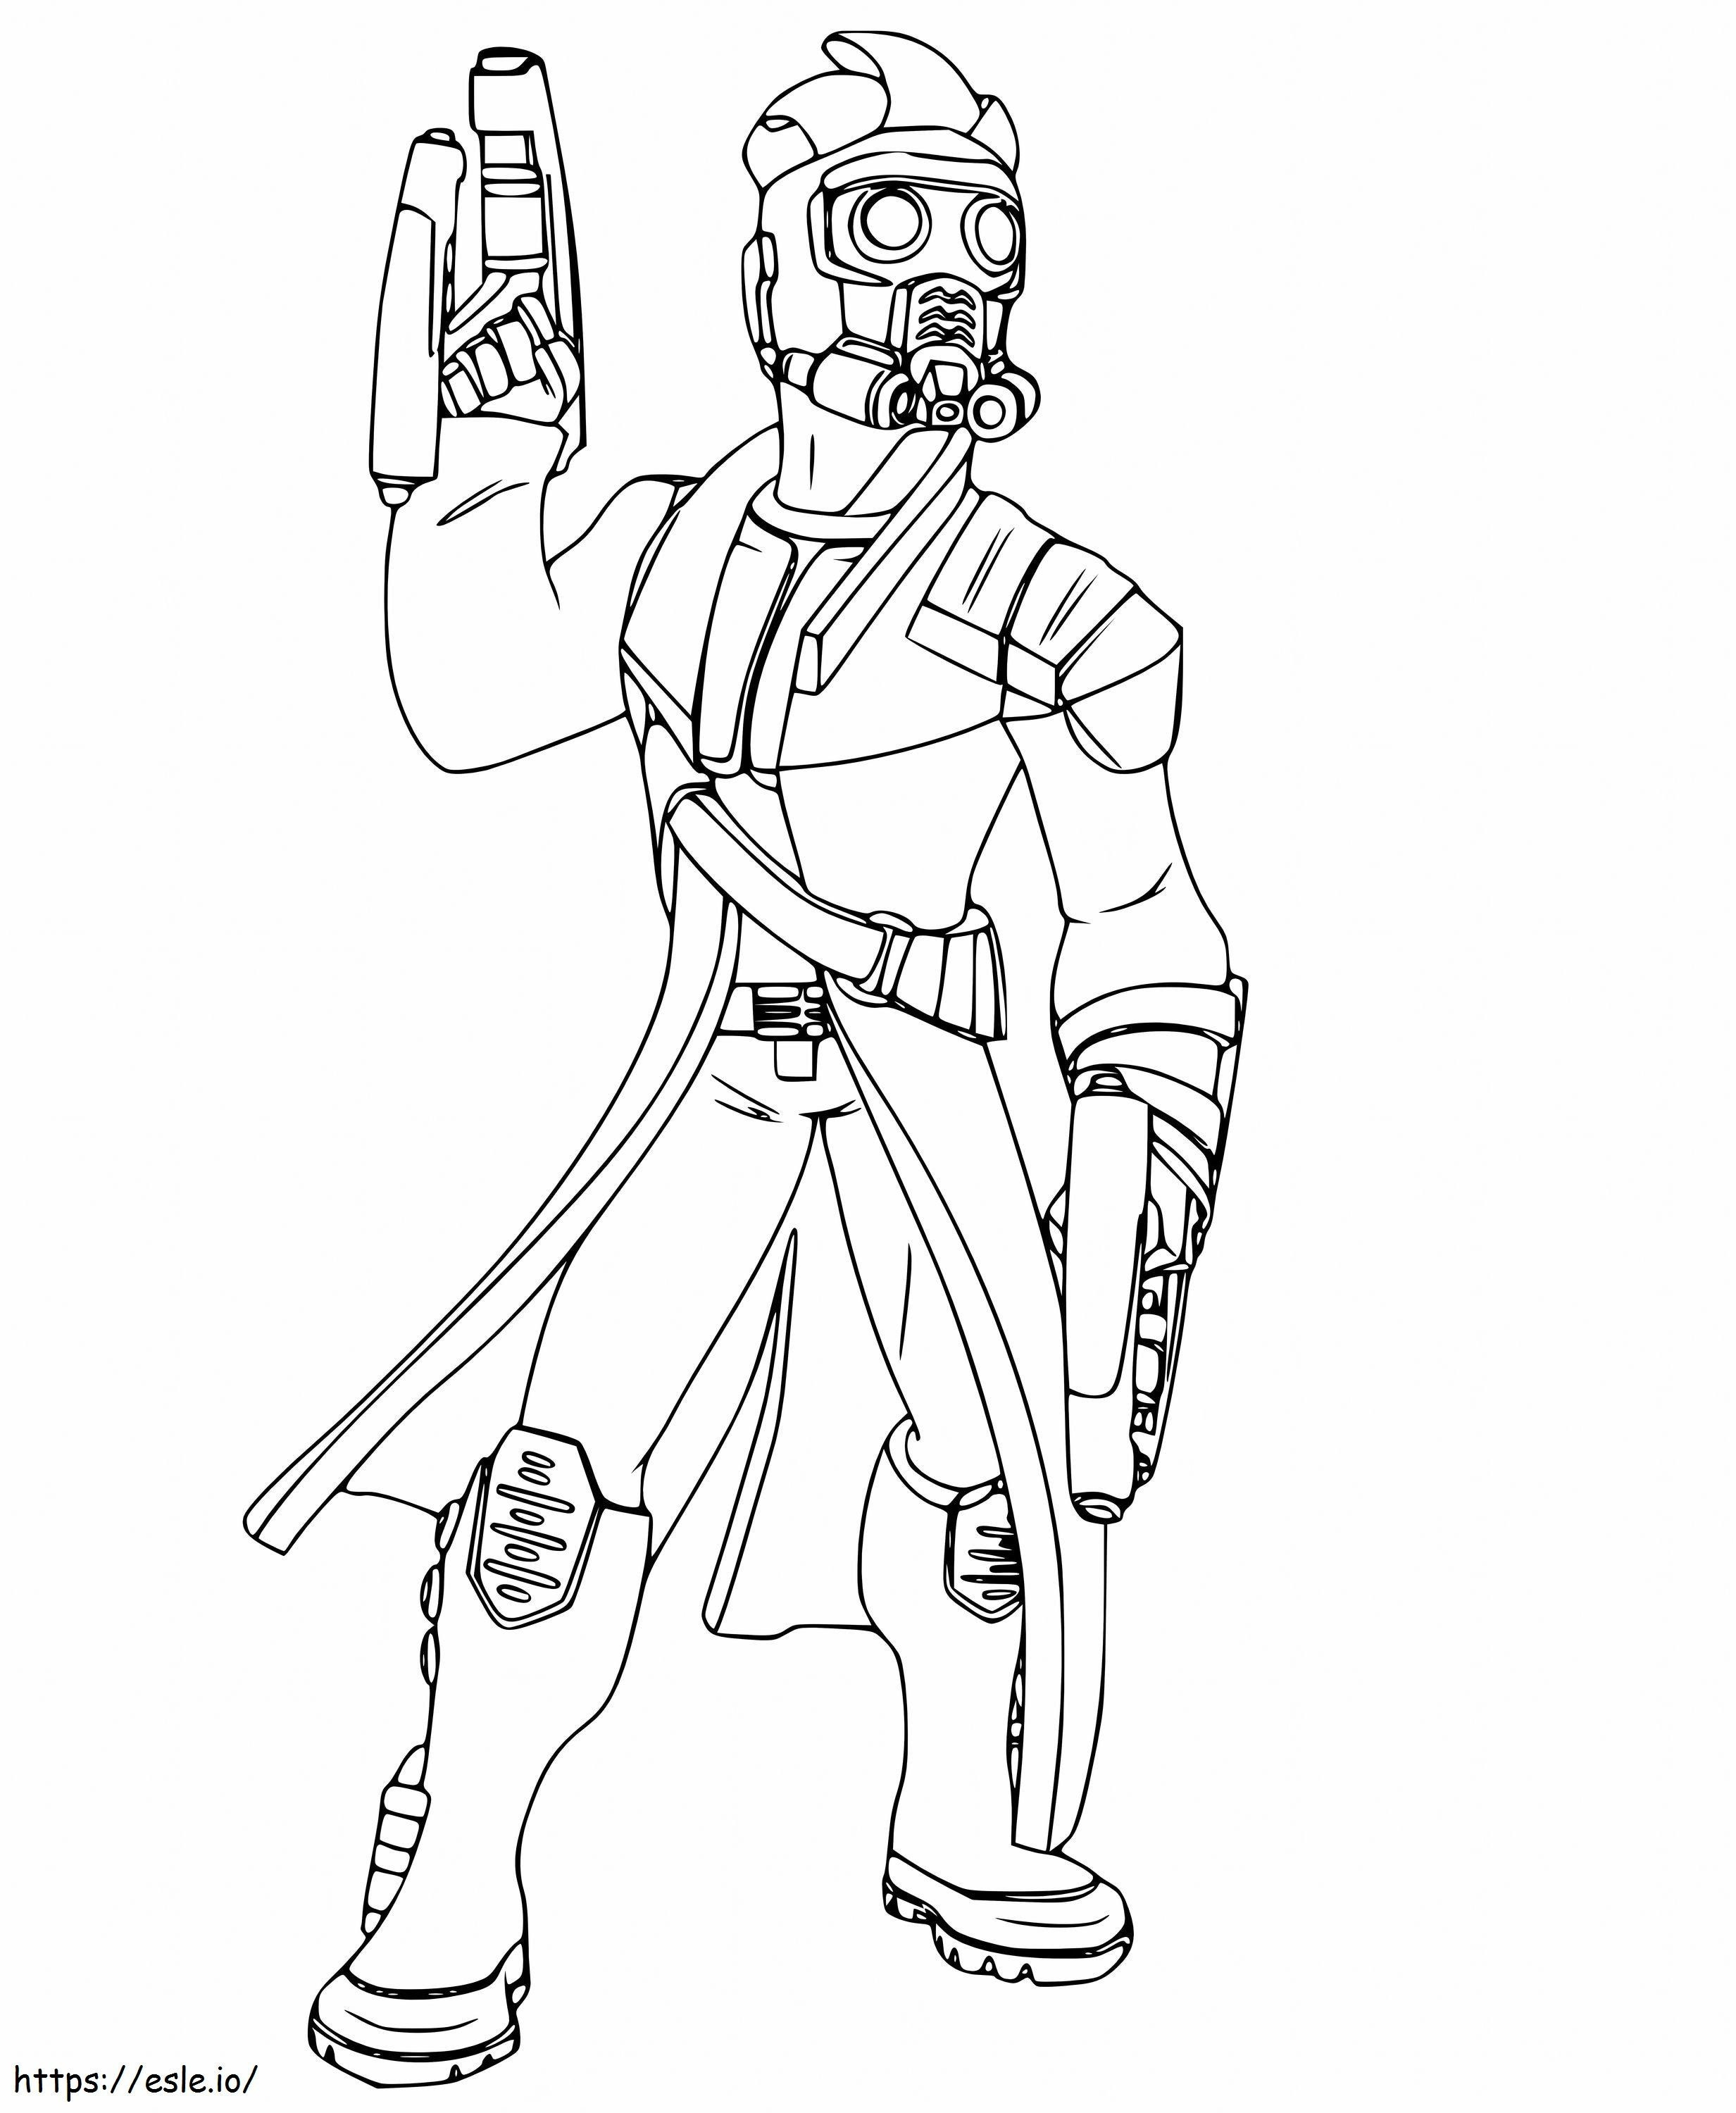 1547632859 New Images Of Star Lord Image On Pinterest coloring page